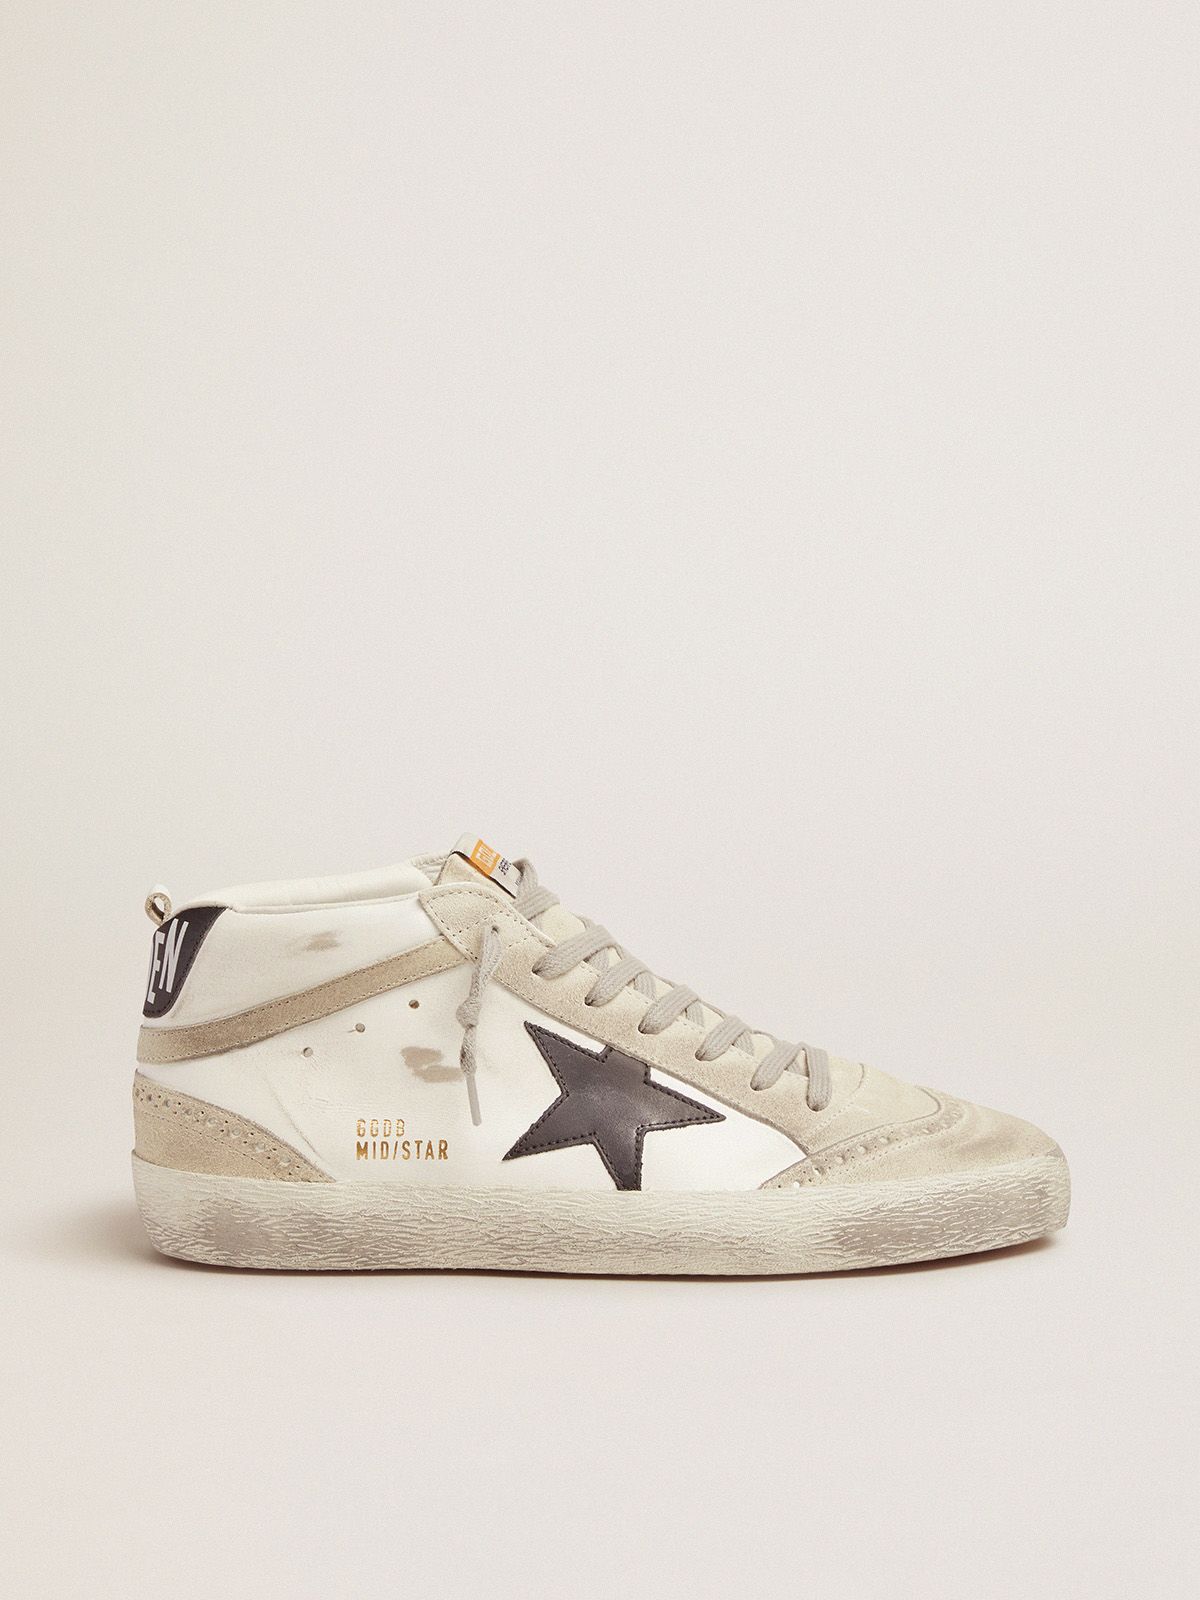 Black and white Mid Star sneakers | 